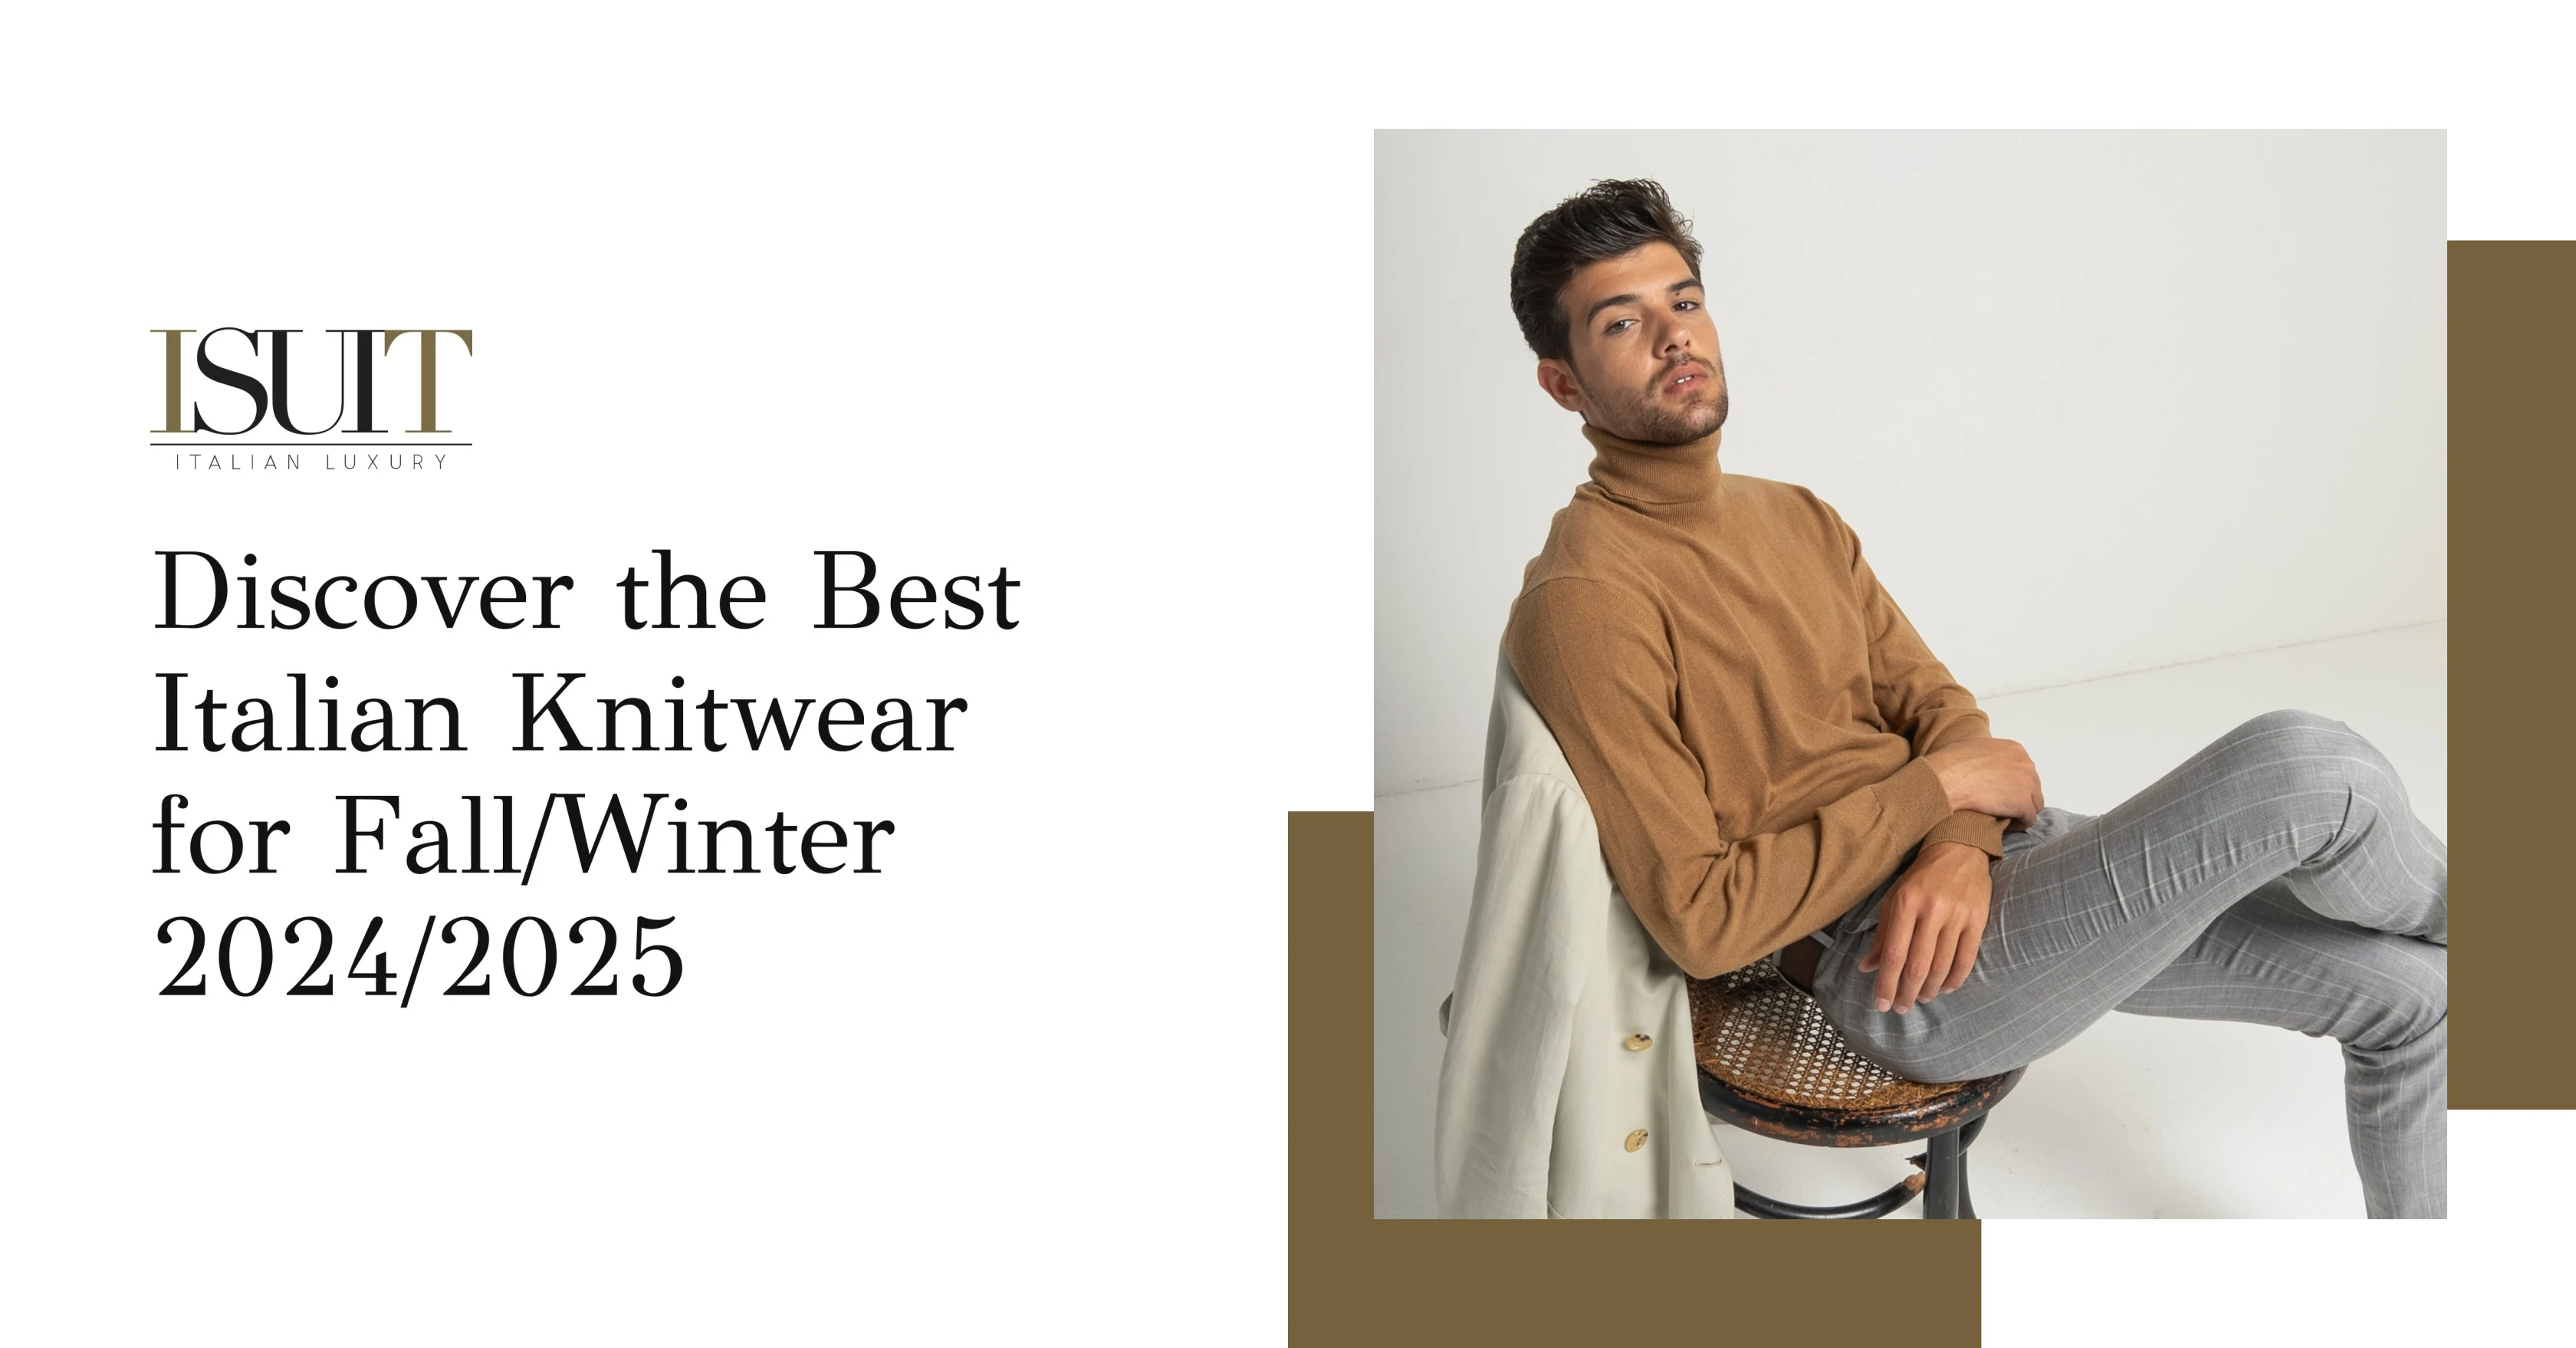  Discover the Best Italian Knitwear for Fall/Winter 2024/2025